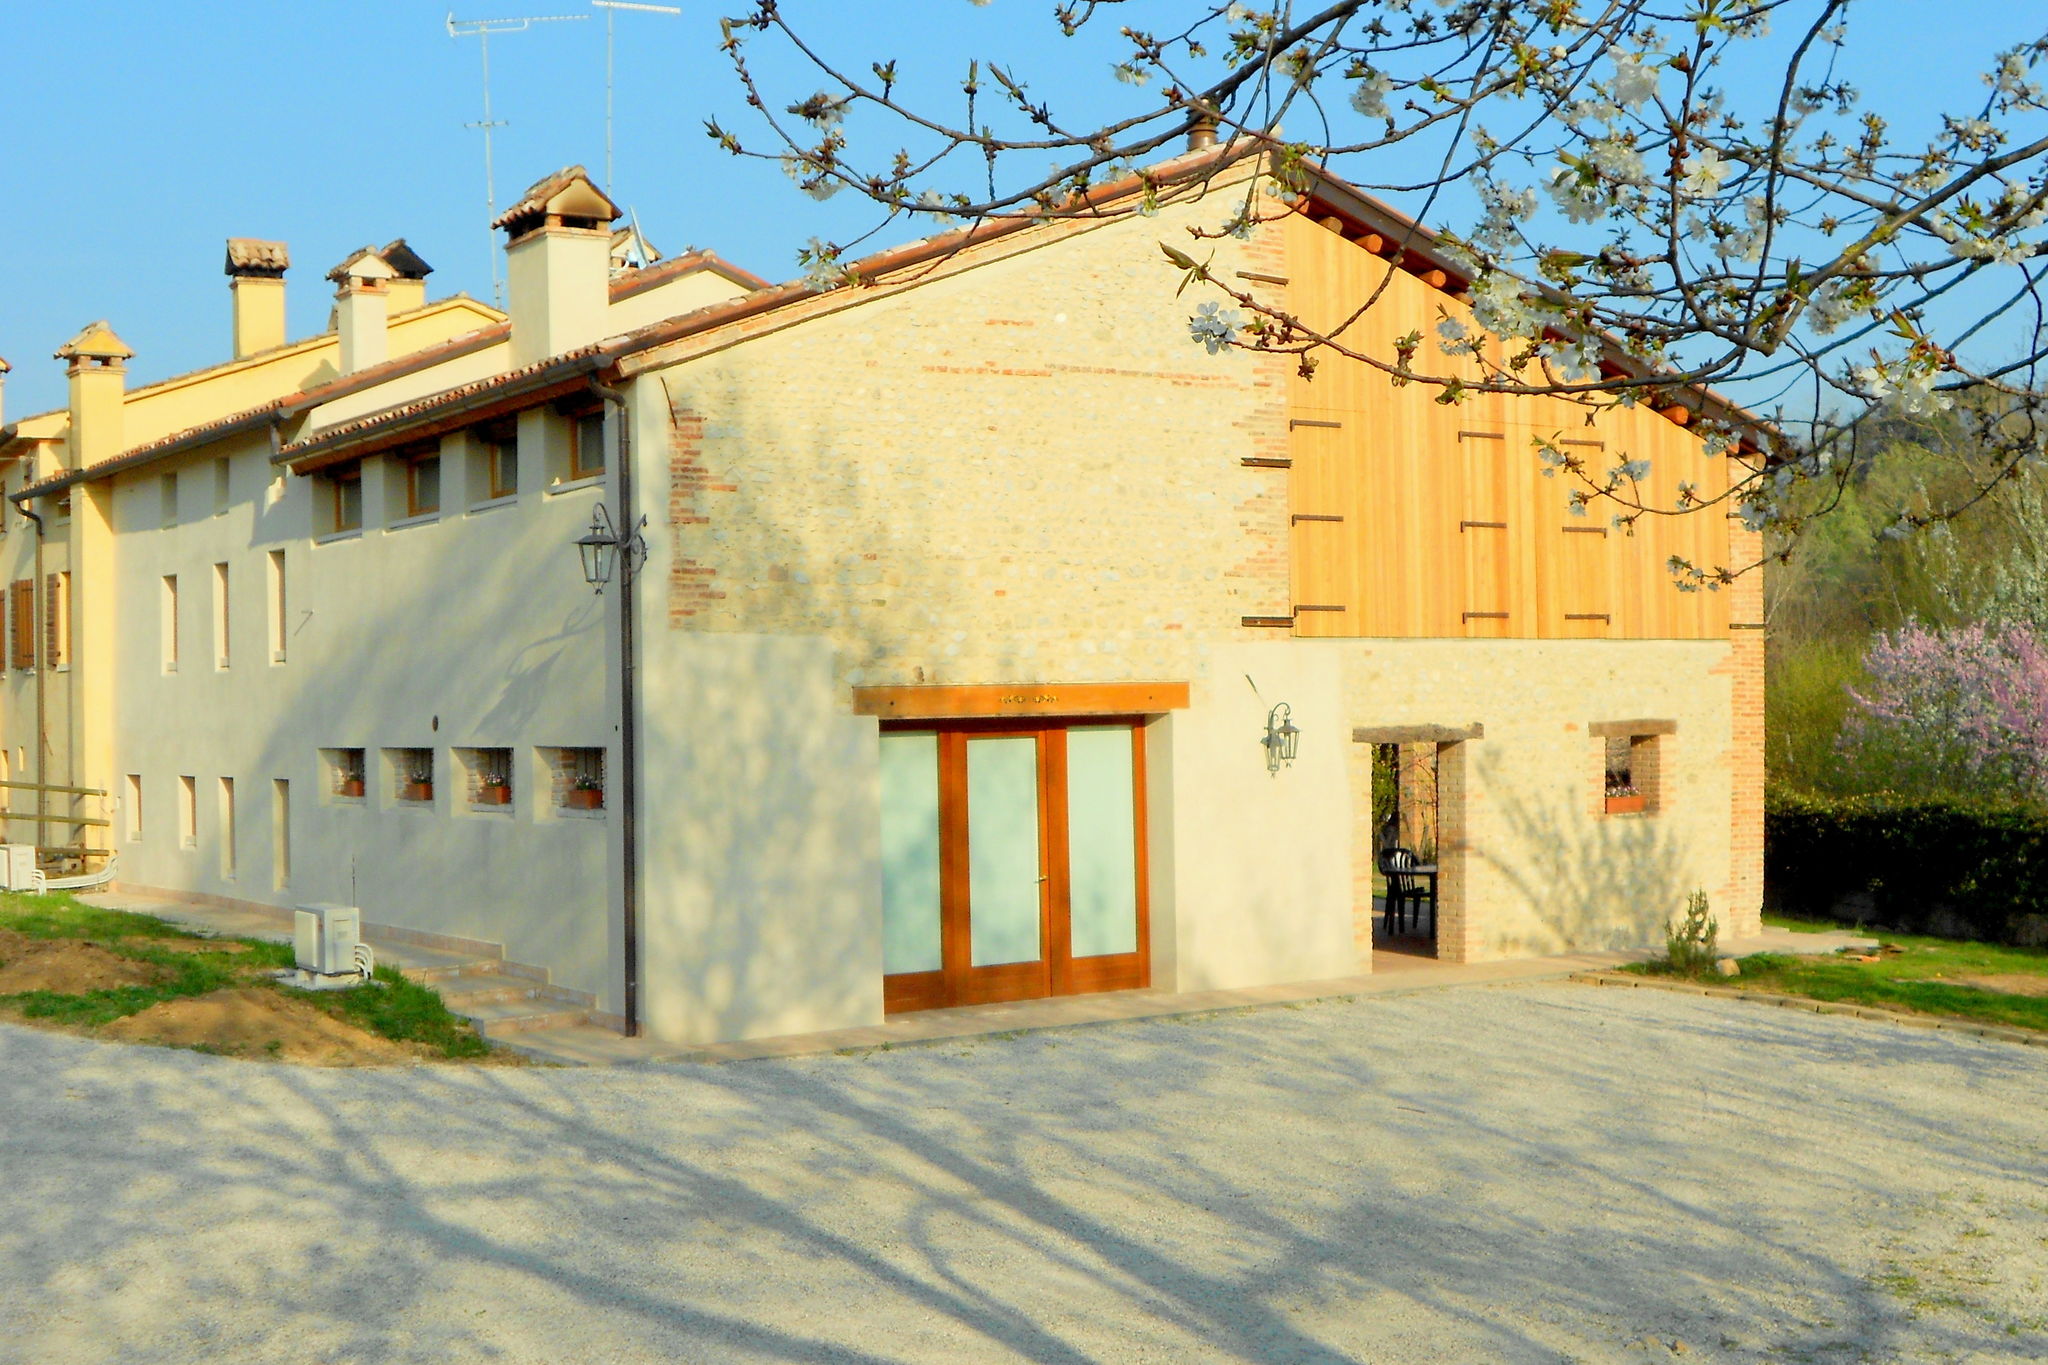 Authentic holiday accommodation on a farm, near Asolo.